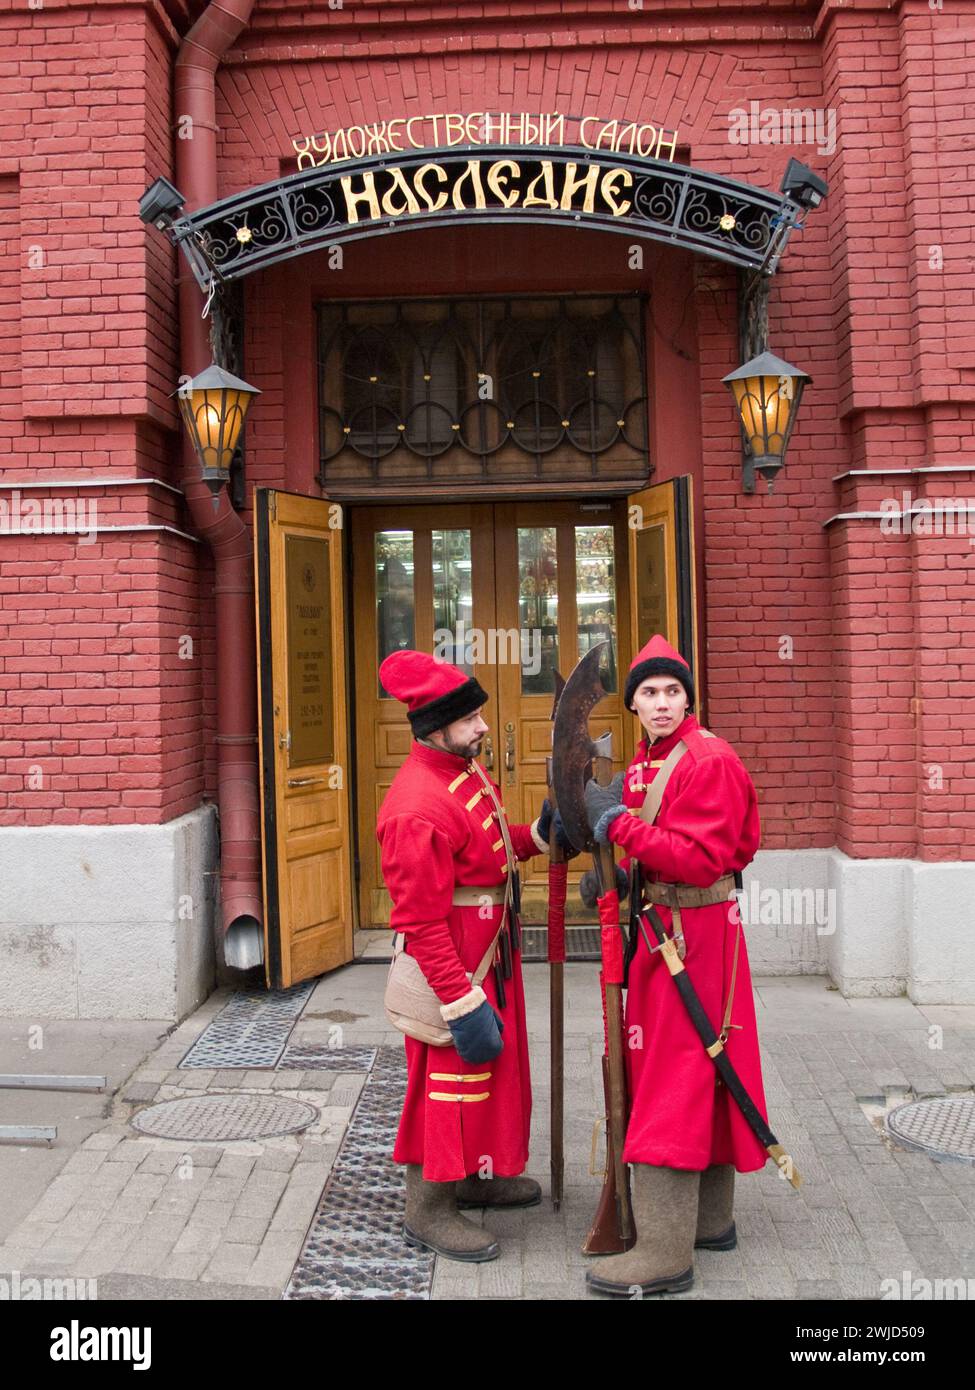 Two men dressed in traditional costumes outside a restaurant in Moscow's Red Square, Russia Stock Photo